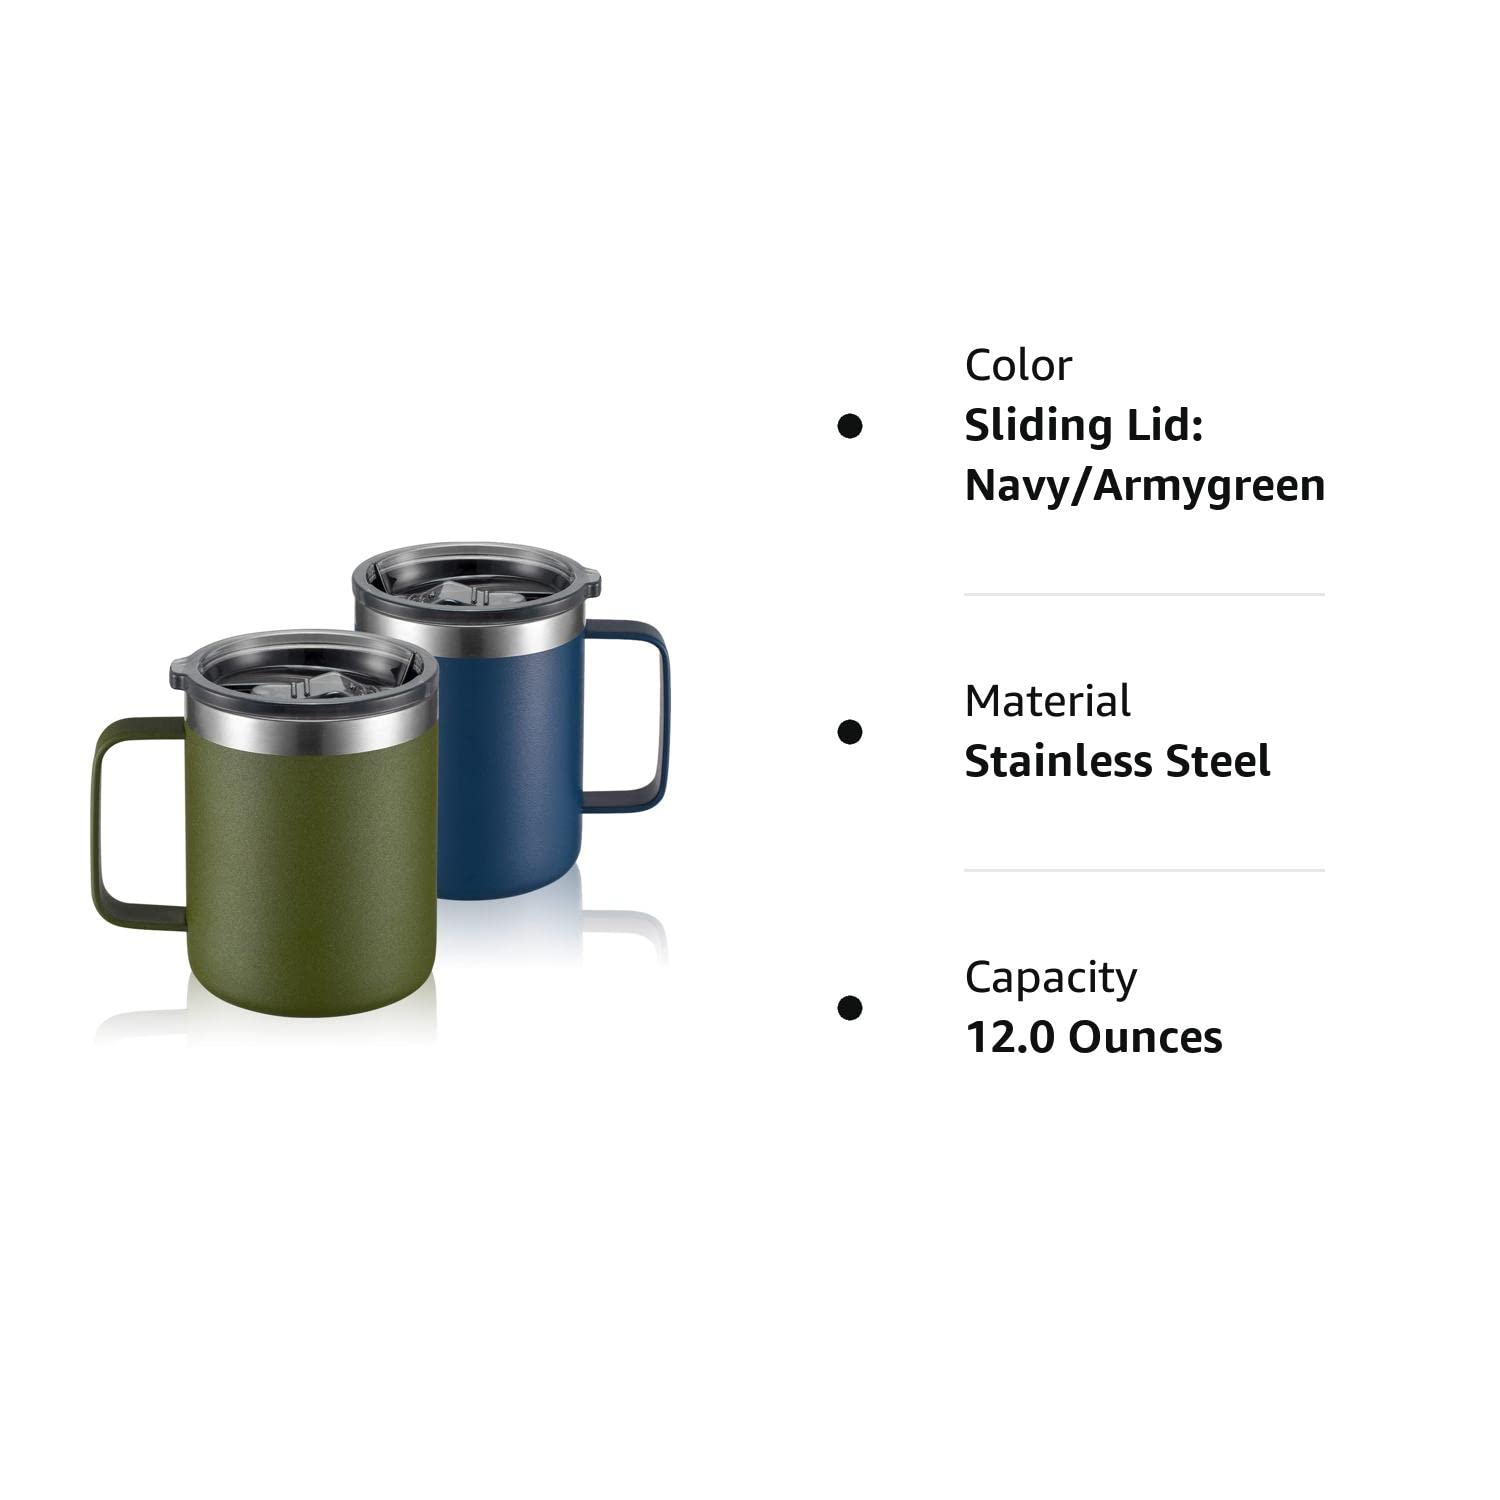 ALOUFEA 12oz Stainless Steel Insulated Coffee Mug with Handle, Double Wall Vacuum Travel Mug, Tumbler Cup with Fliping Lid, Navy and Army Green